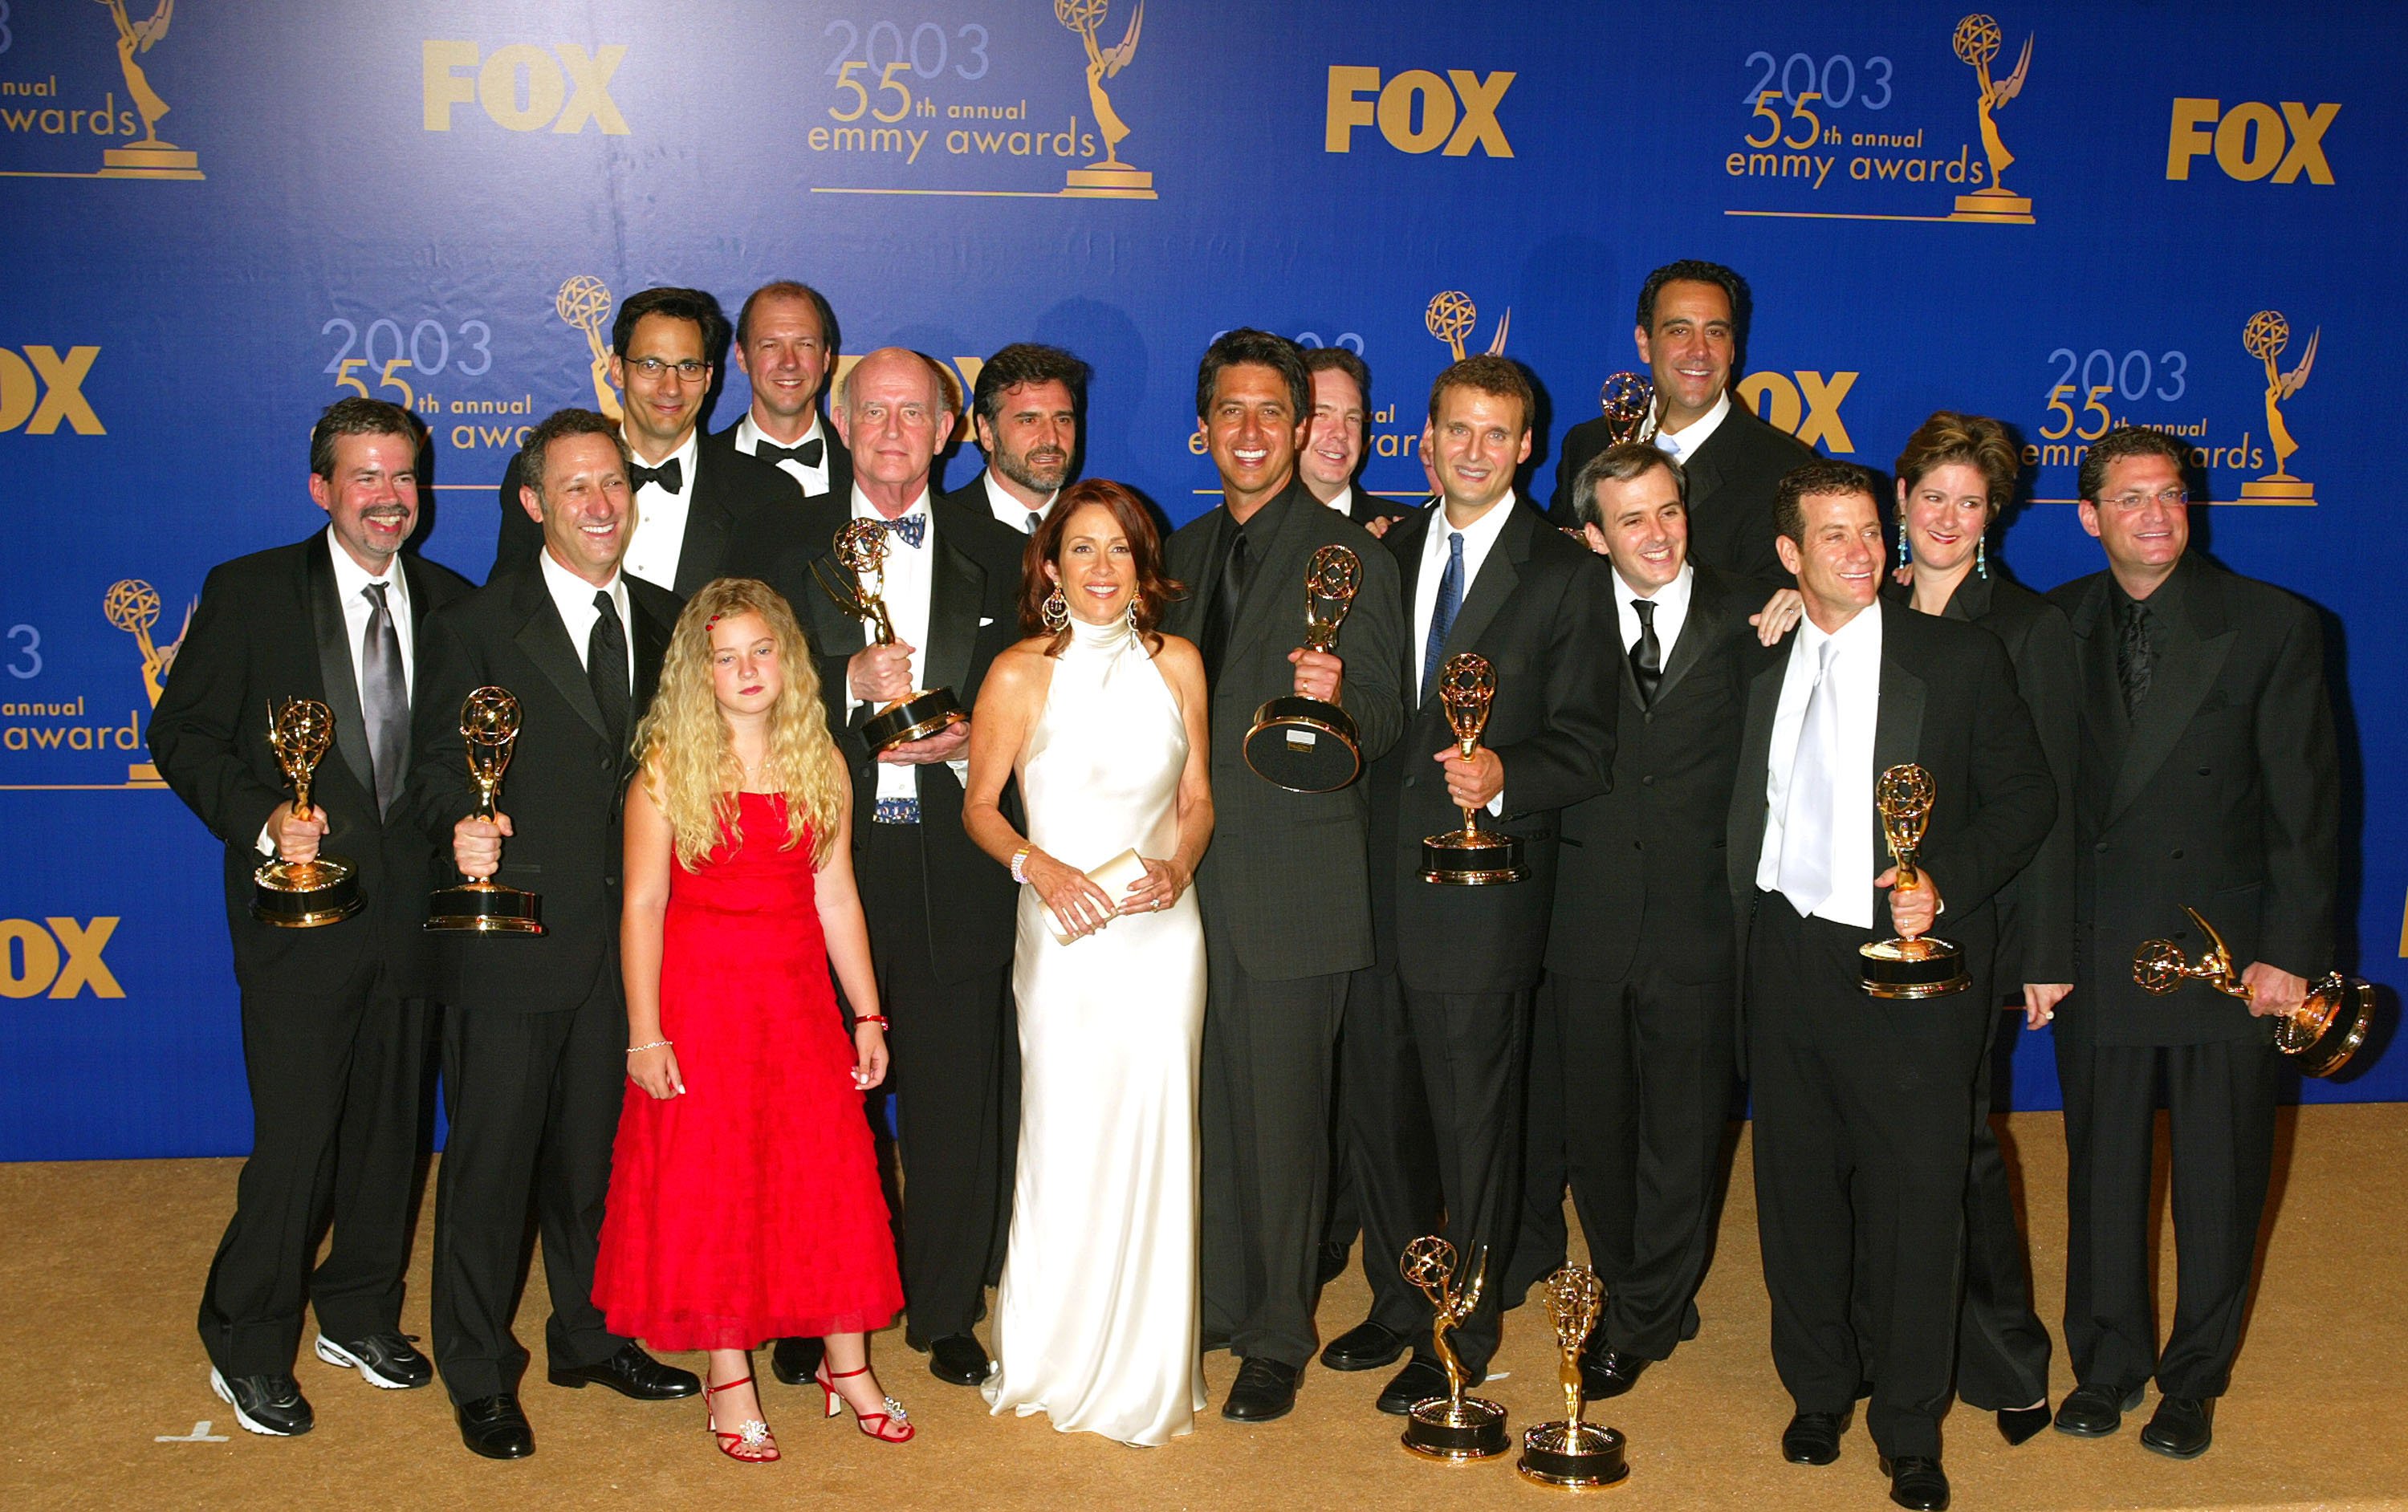 The cast of 'Everybody Loves Raymond' poses with the show's writers, producers, and Emmy awards in 2003